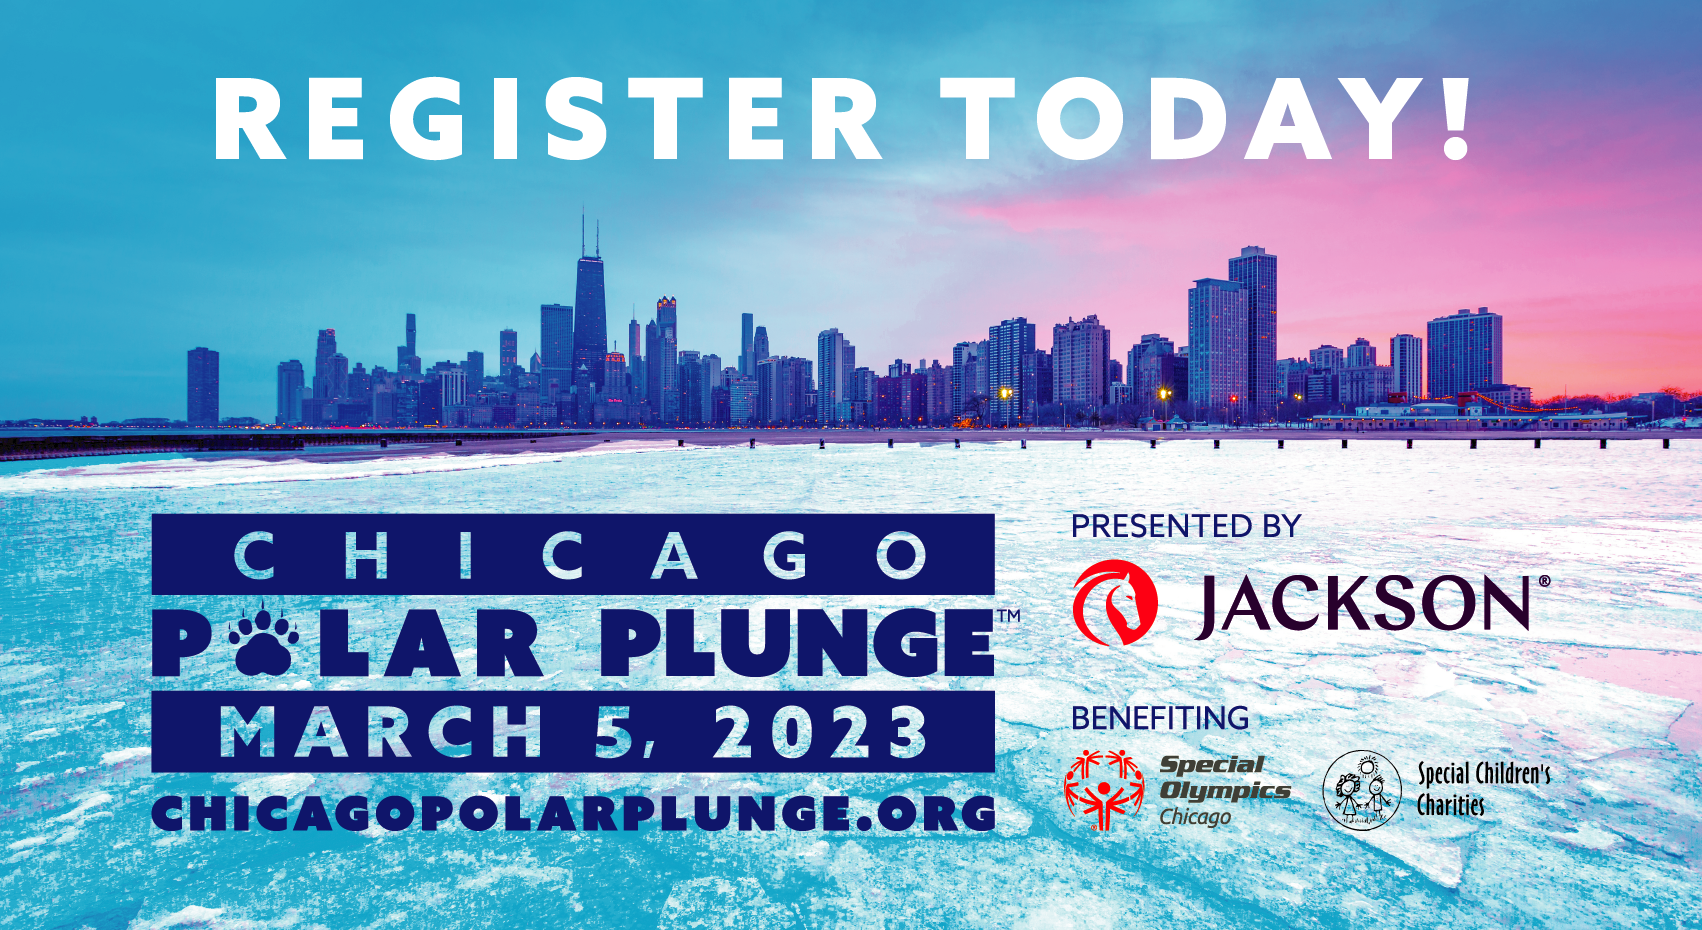 The 23rd Annual Chicago Polar Plunge presented by Jackson